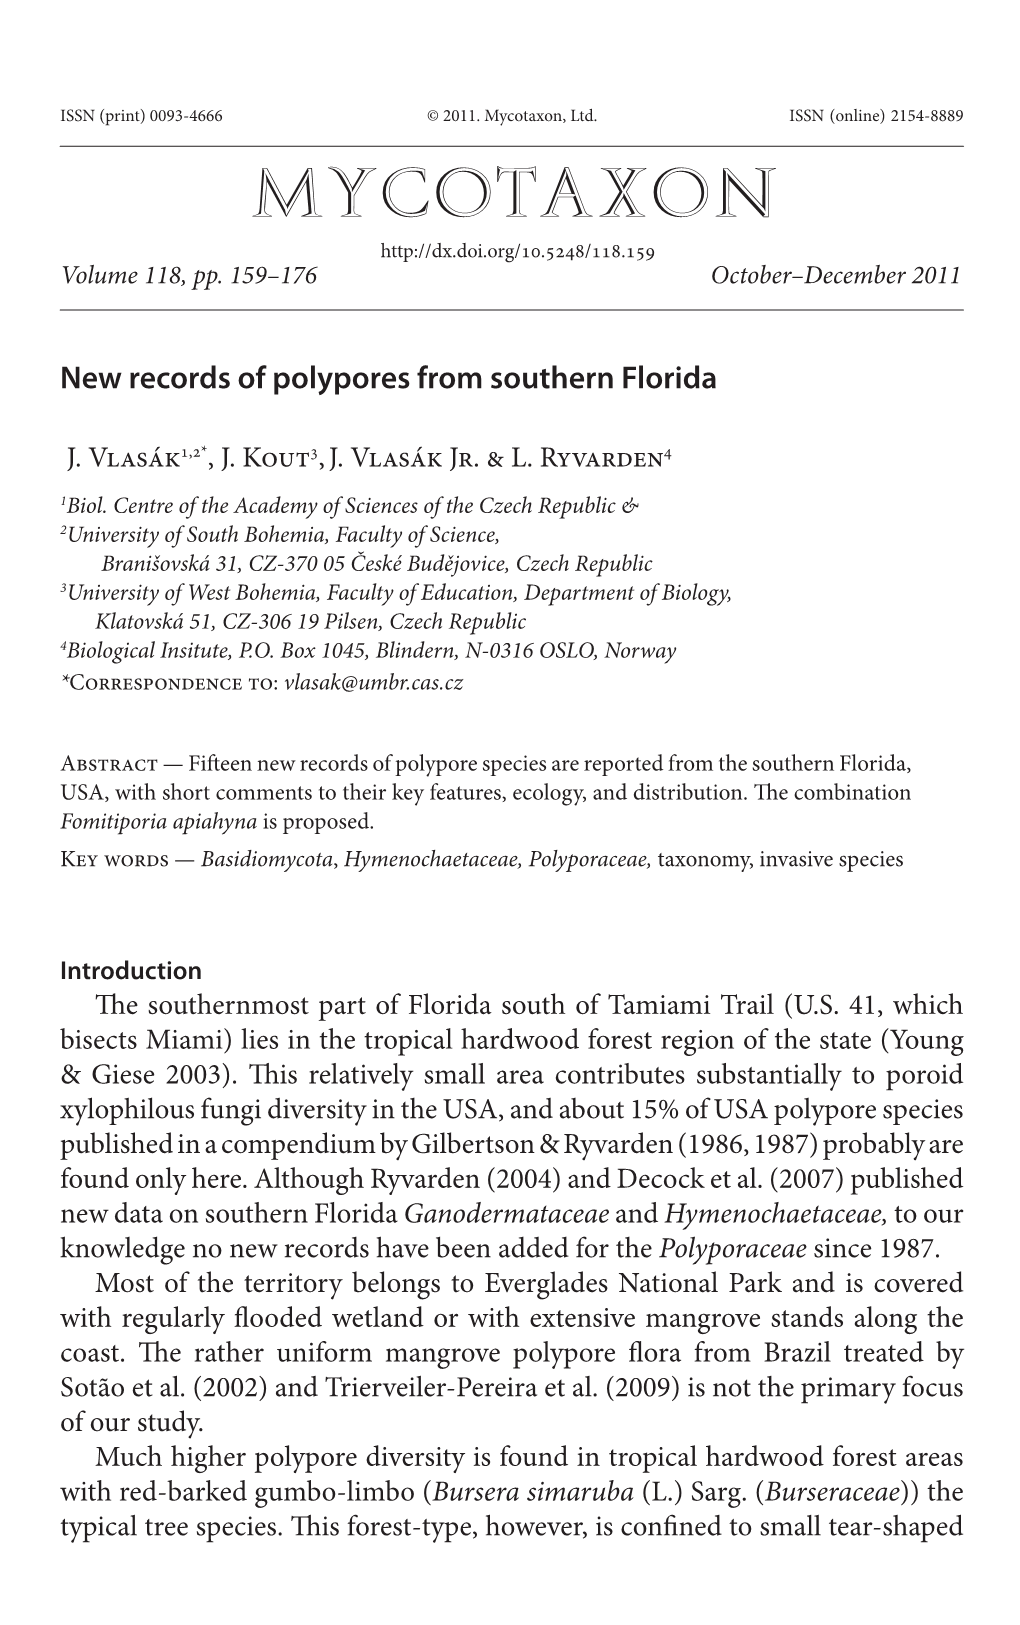 New Records of Polypores from Southern Florida